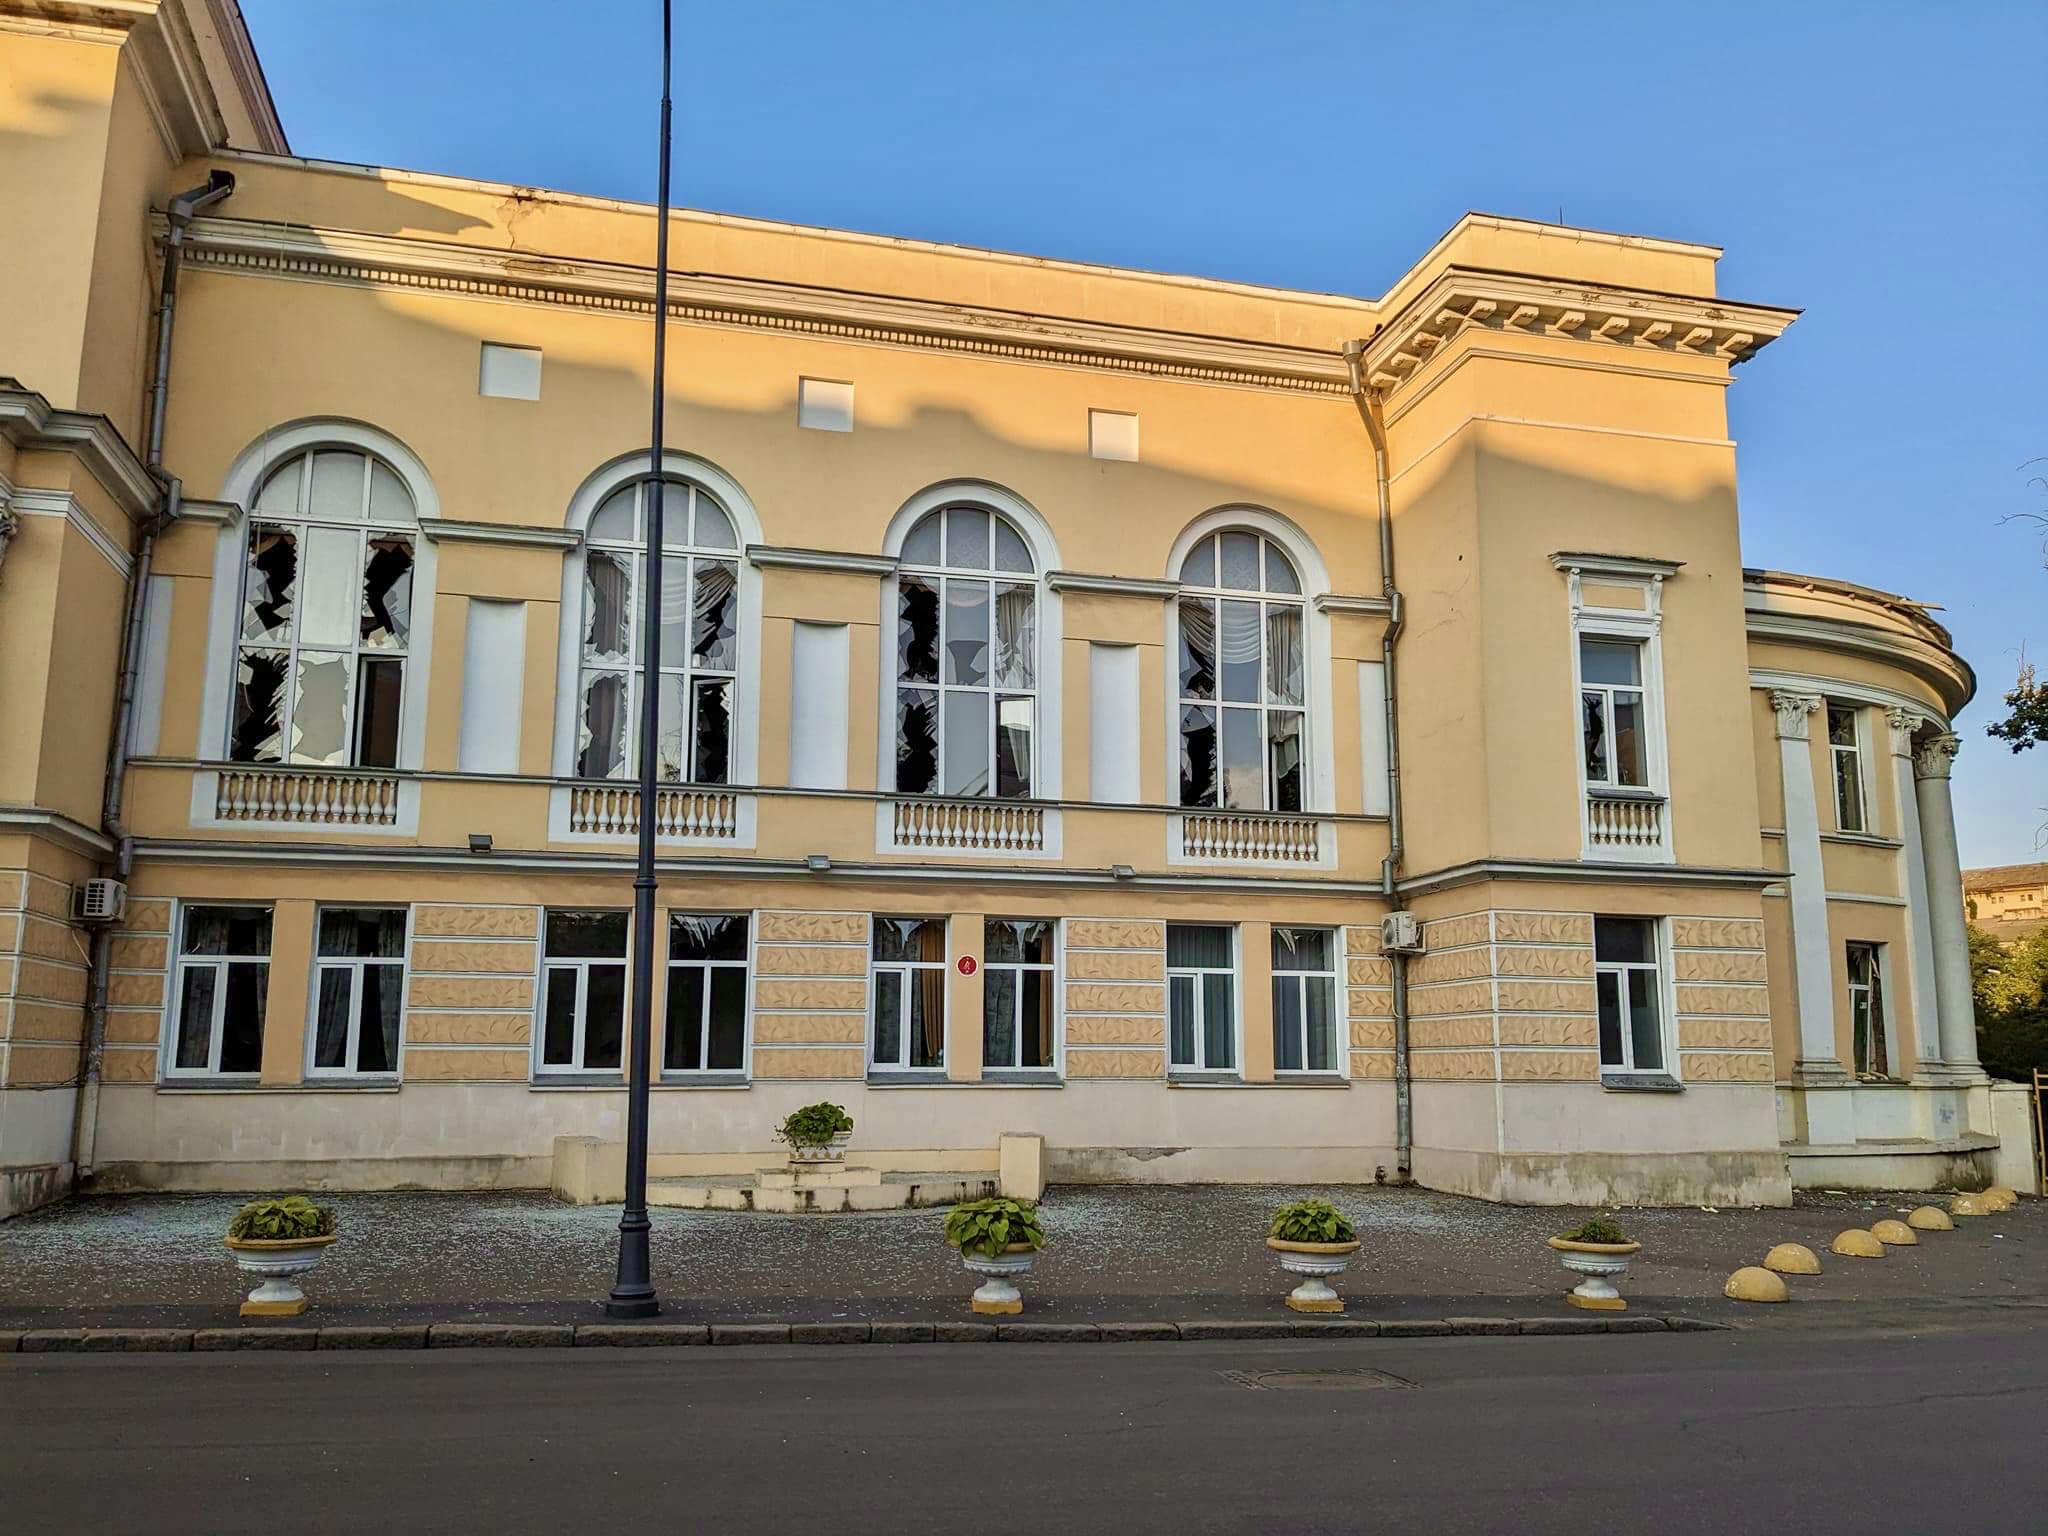 The Stolyarsky Music School in Odessa has launched a fundraising campaign for repairs following a missile strike